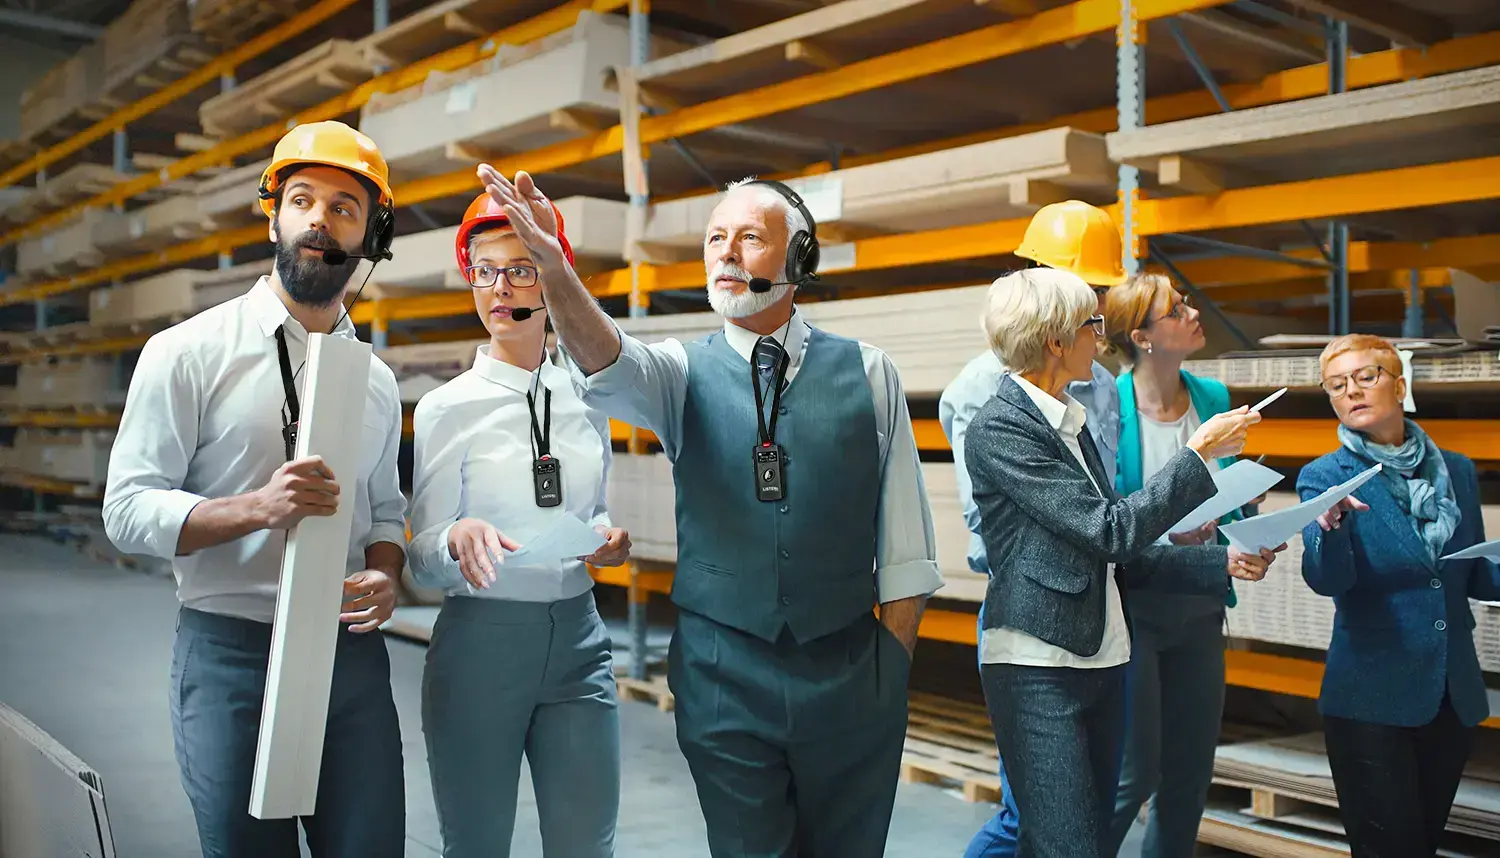 people-wearing-hardhats-and-headsets-on-factory-floor-1